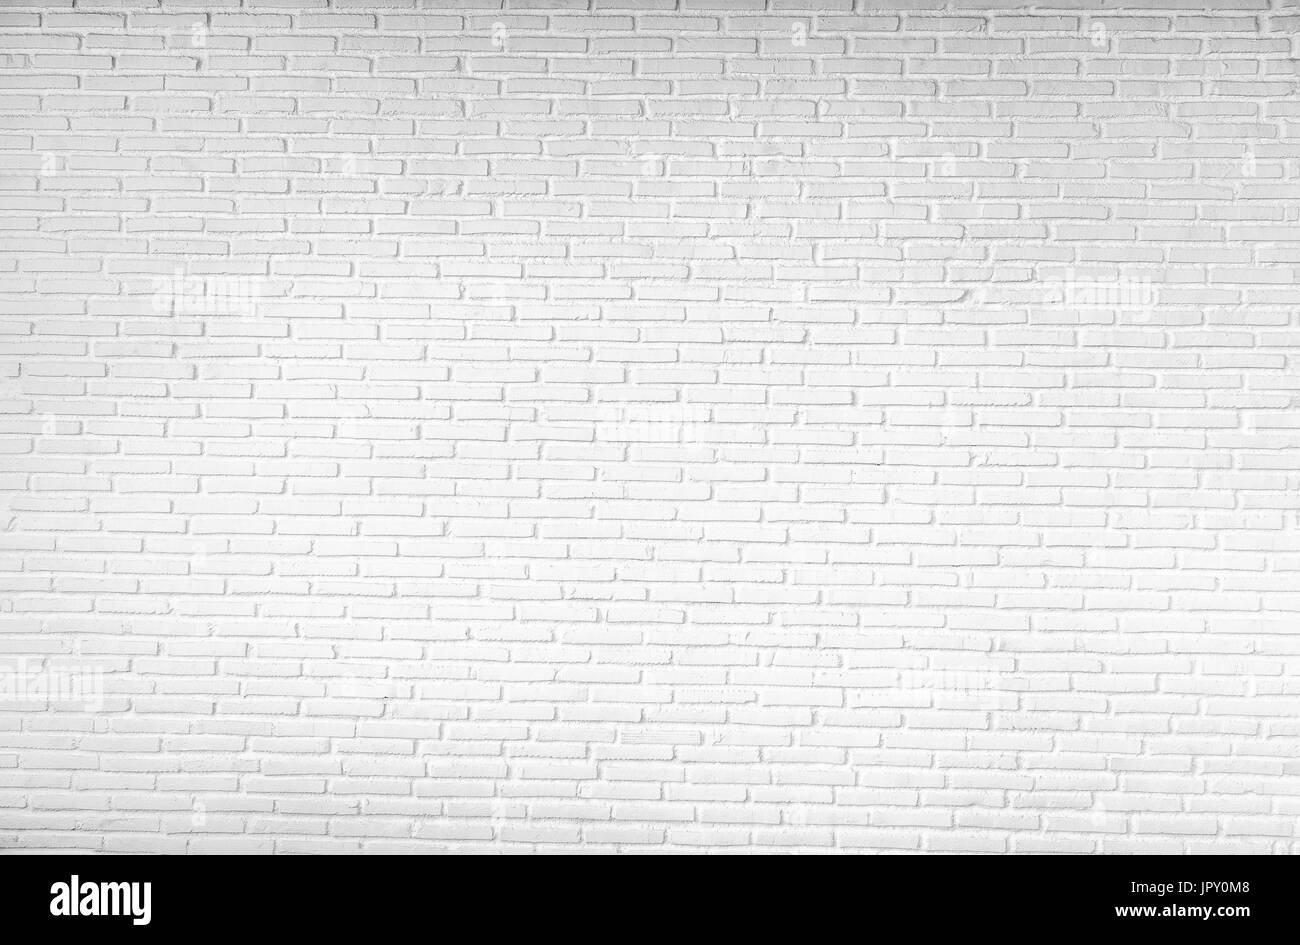 Abstract Old bricks wall background Stock Photo